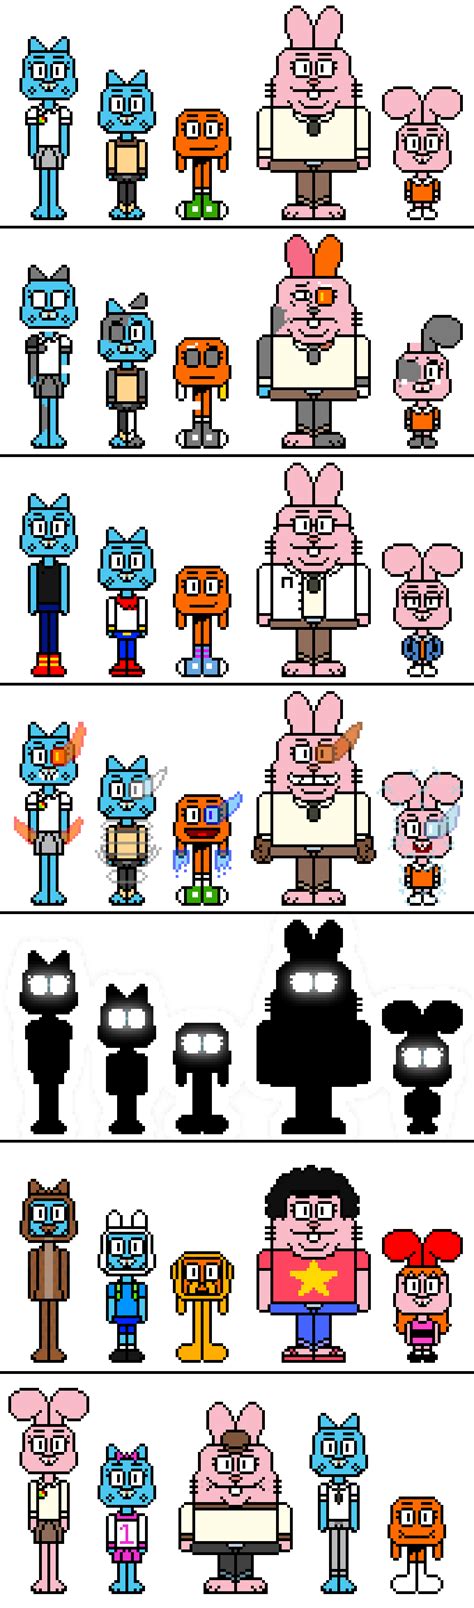 Tawog The Wattersons Sprite Sets By Mixeltime On Deviantart